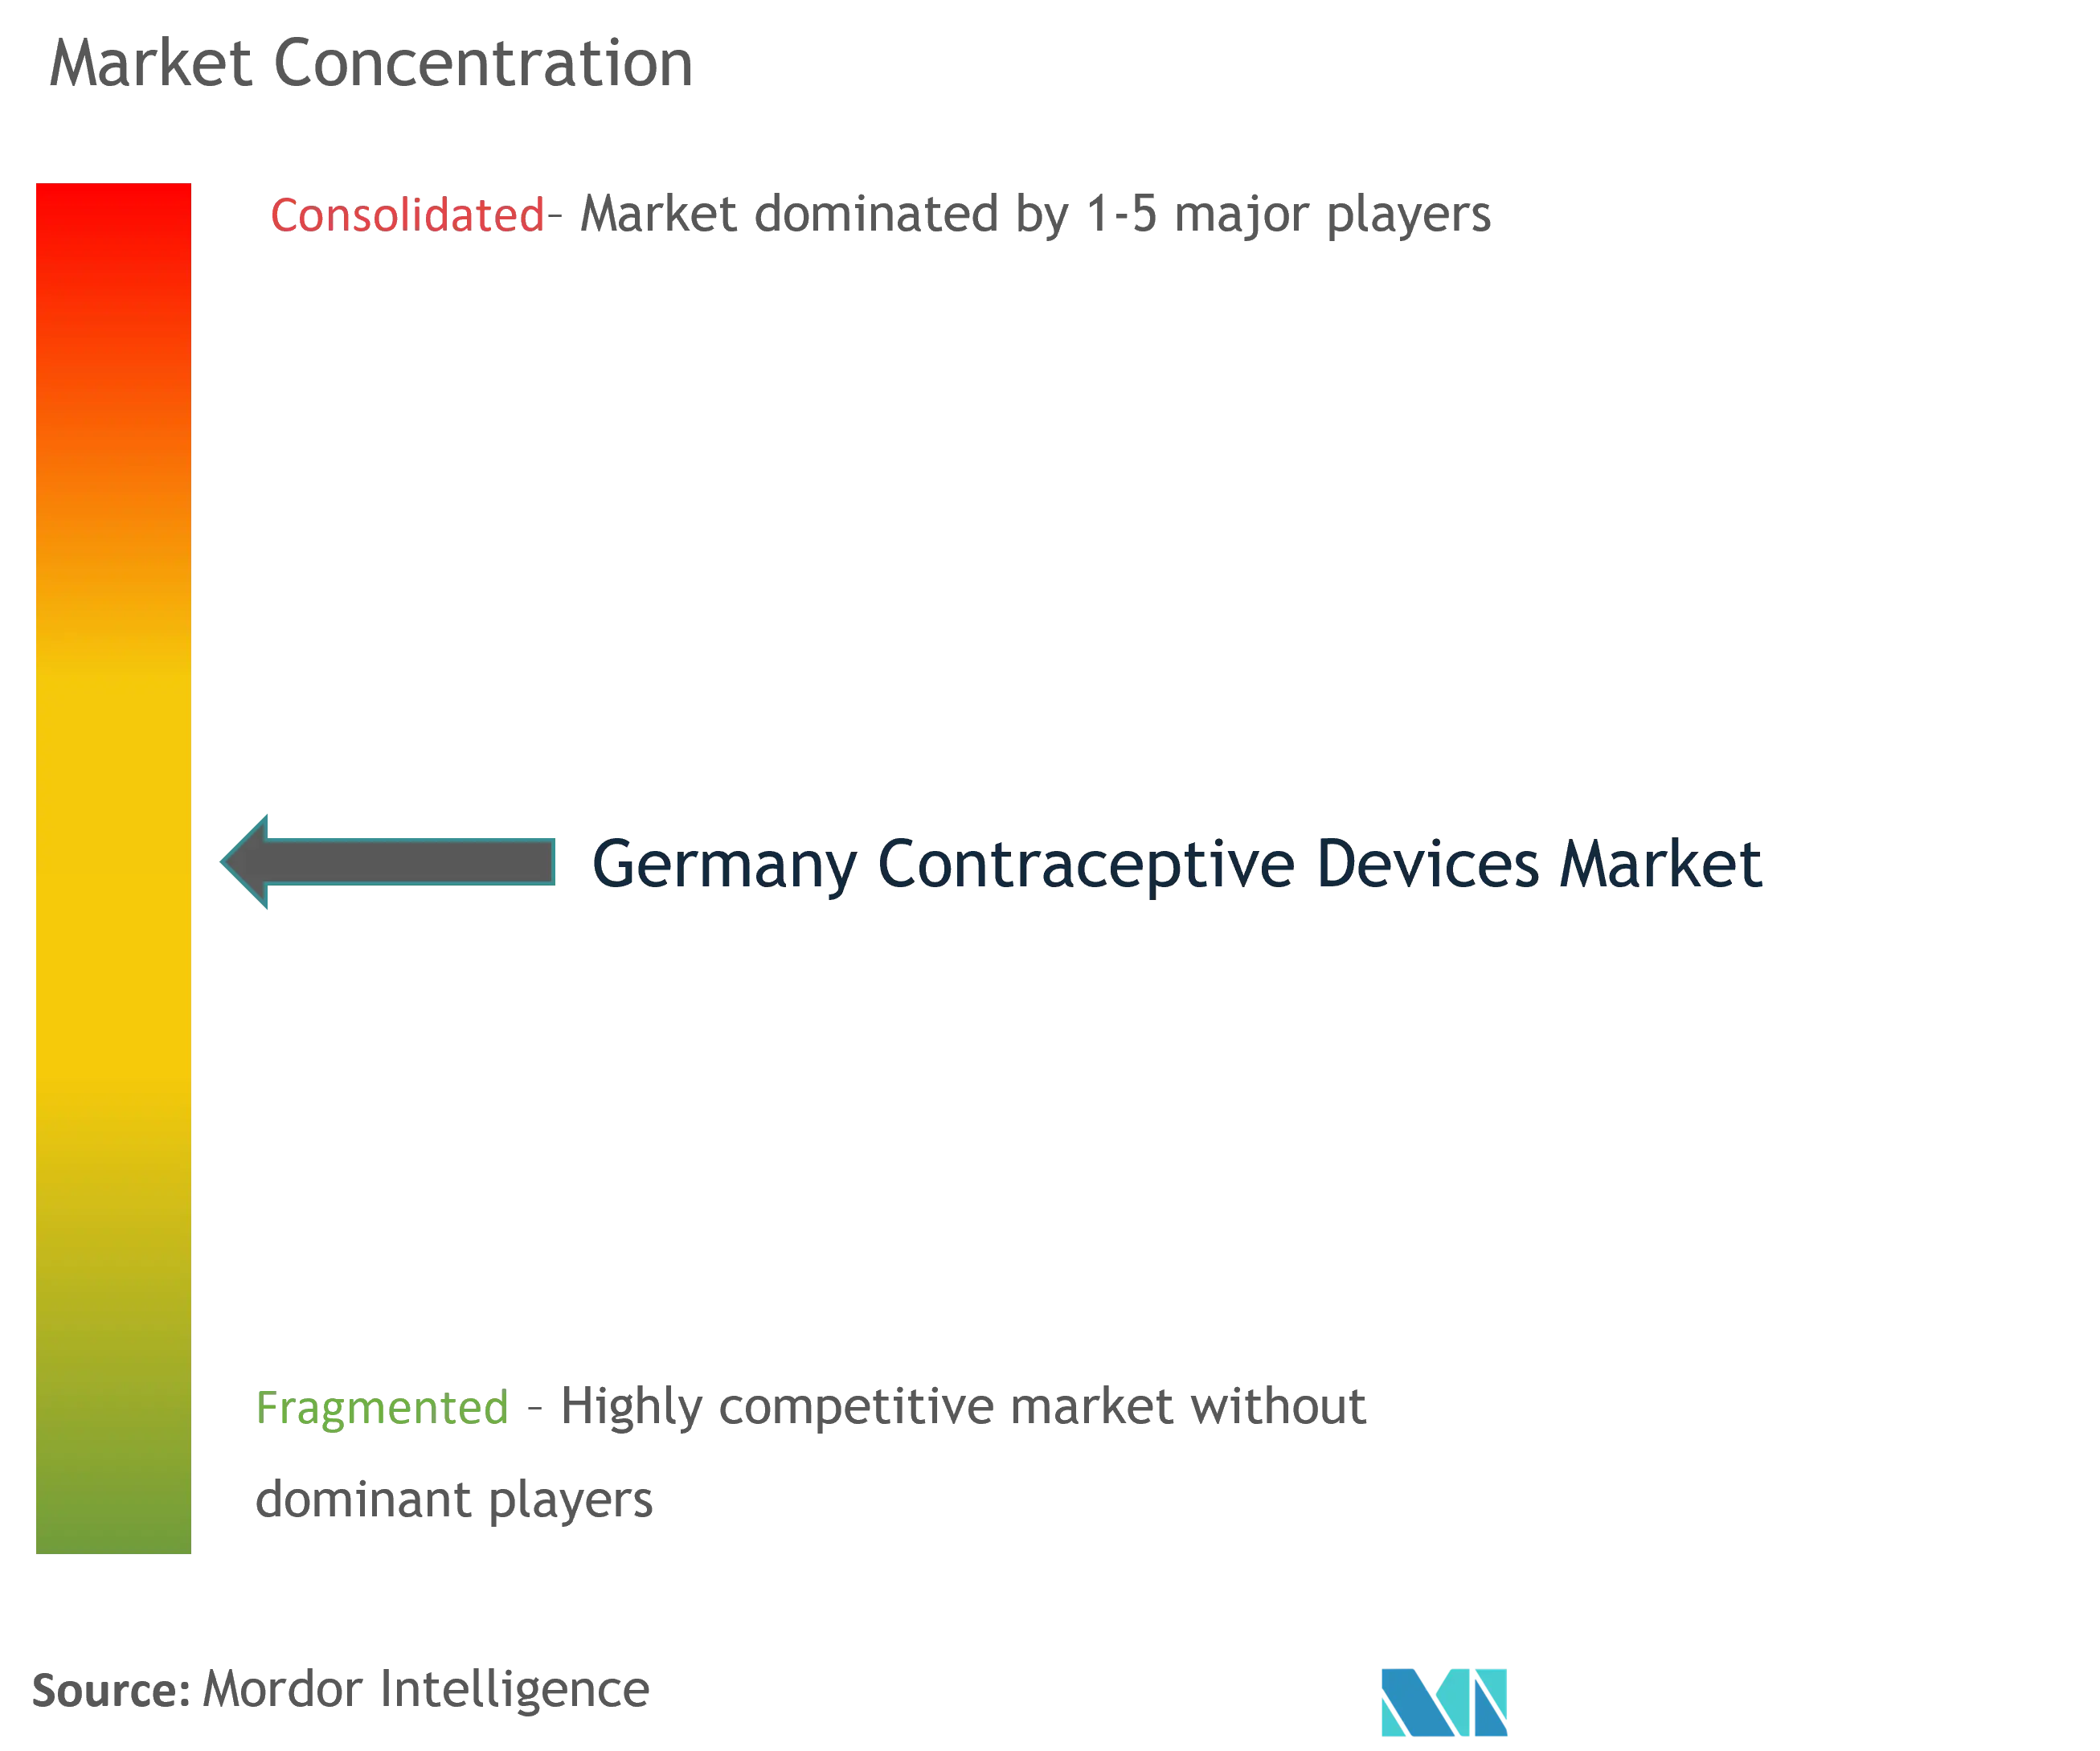 Germany Contraceptive Devices Market Concentration